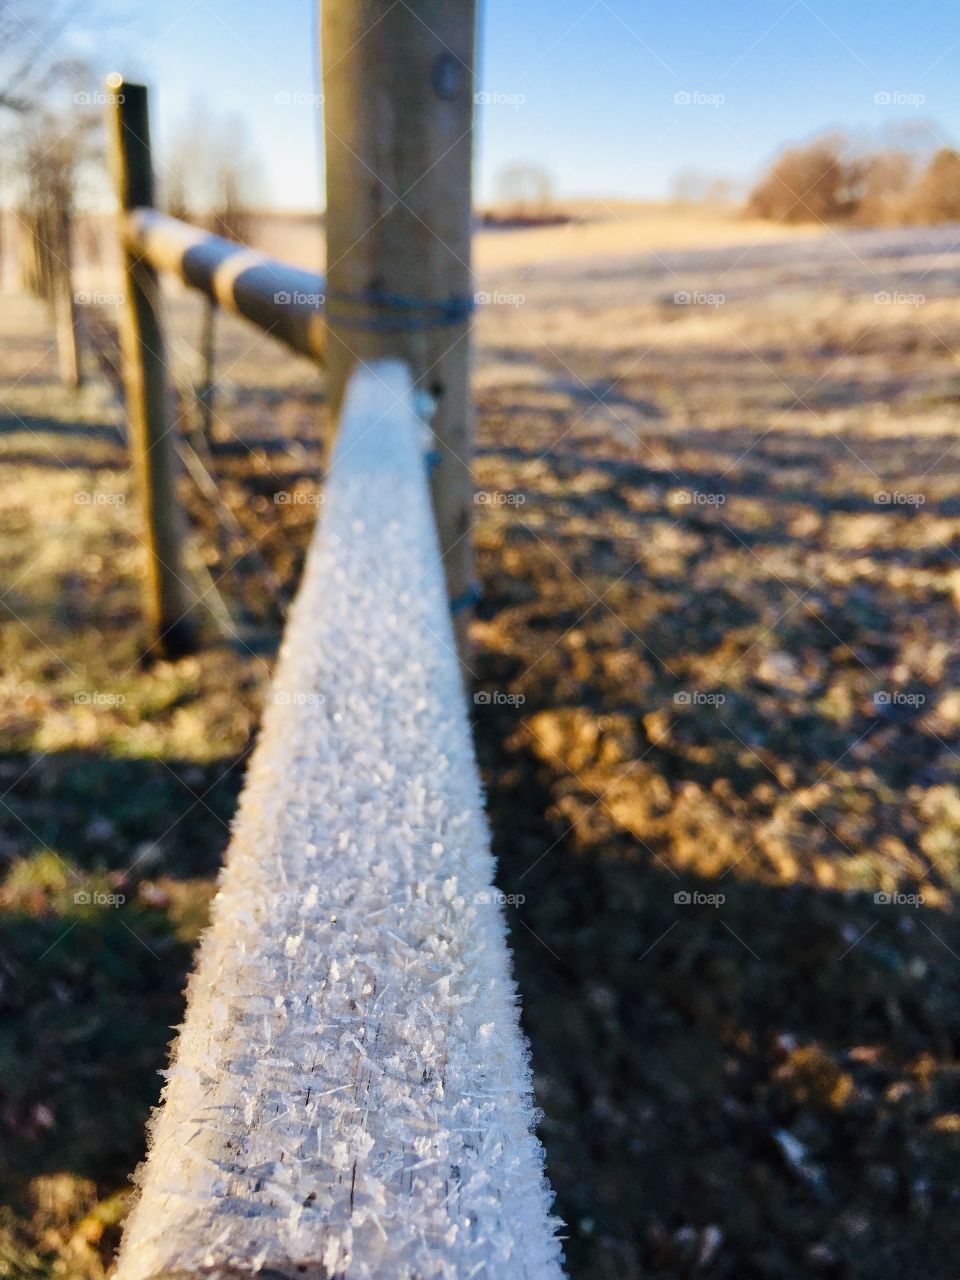 Low-angled view of frost on a wooden fence rail, shadows of tree trunks on dried pasture grass and distant blurred rural background visible 